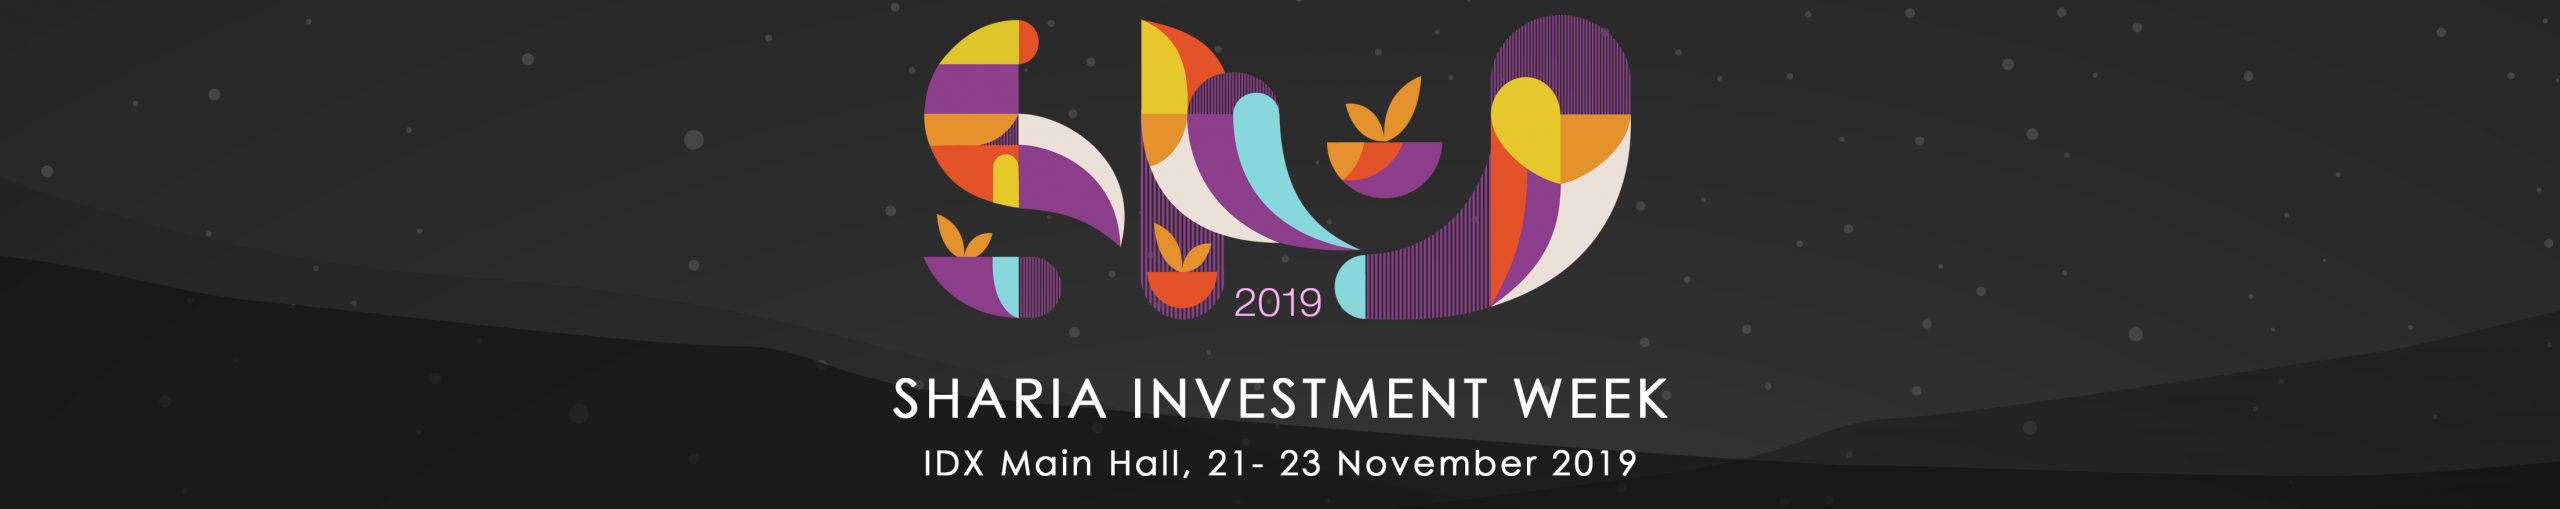 Sharia Investment Week 2019